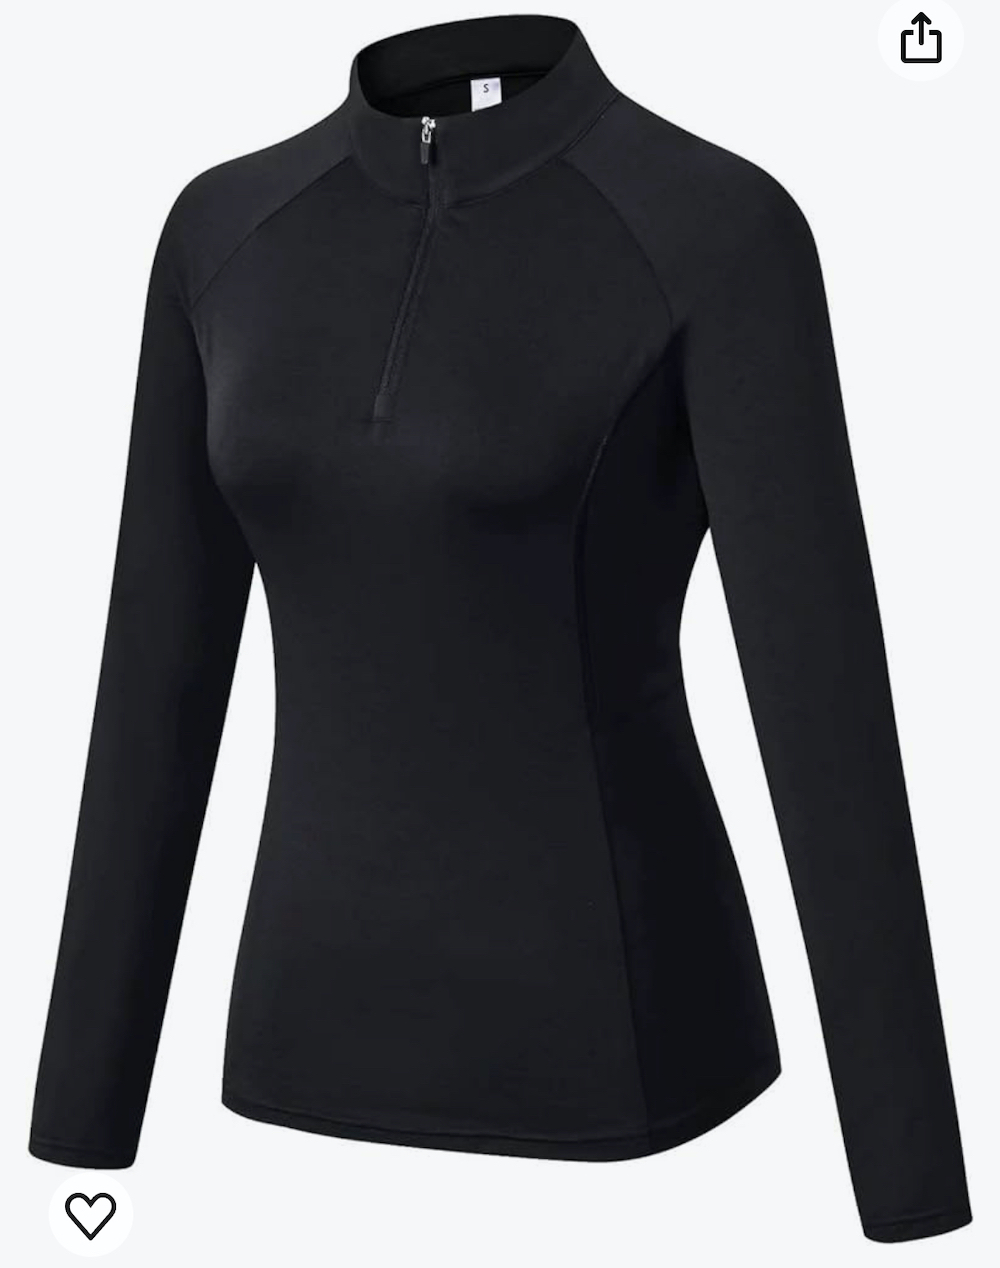 Thermal top for hiking